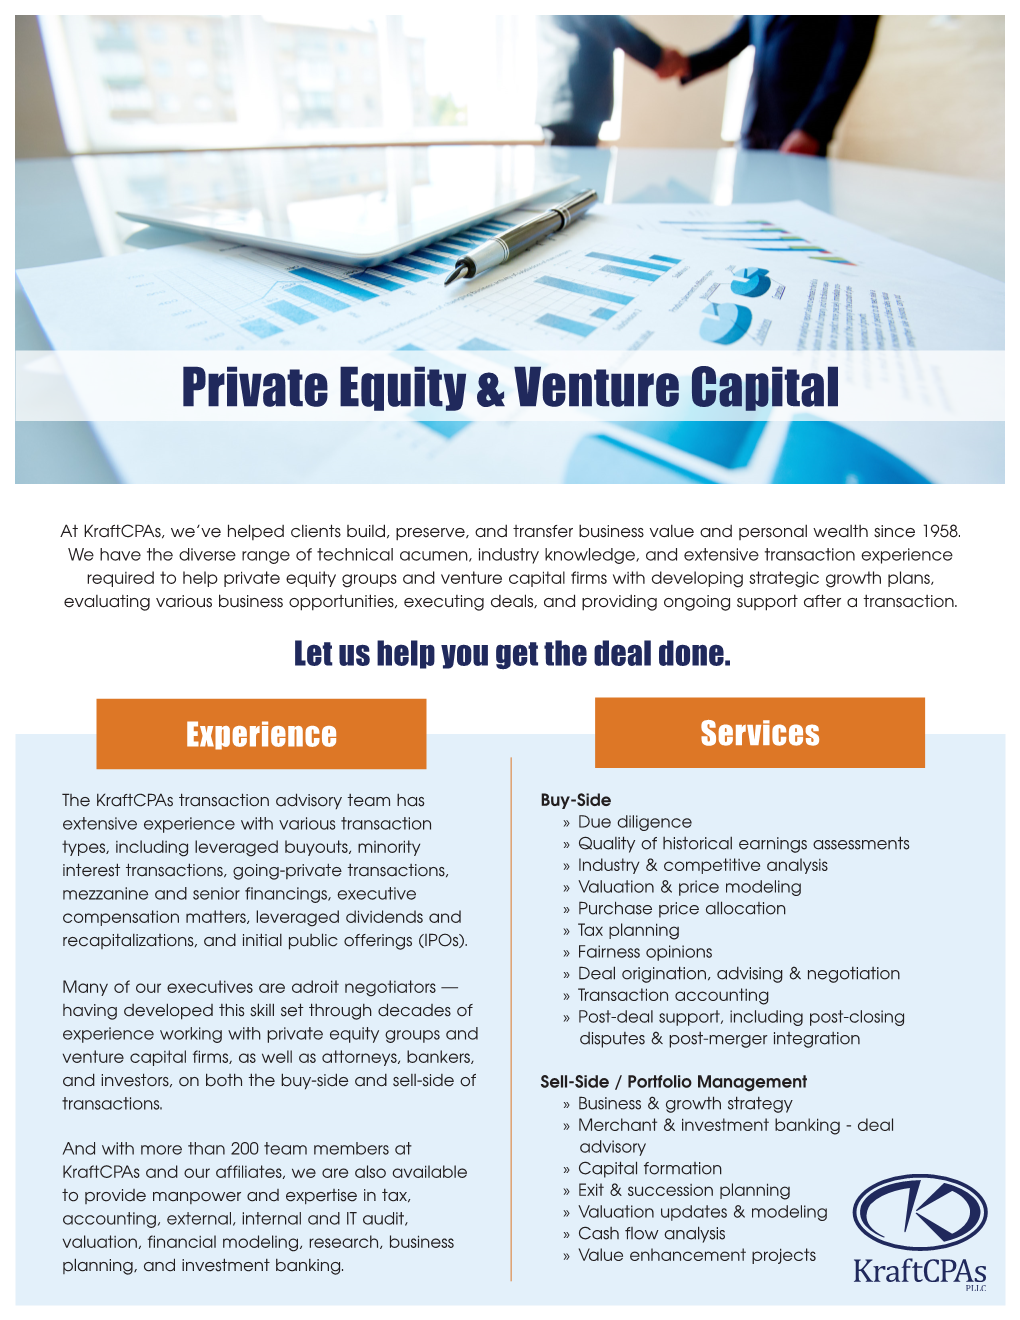 Private Equity & Venture Capital Firm Services